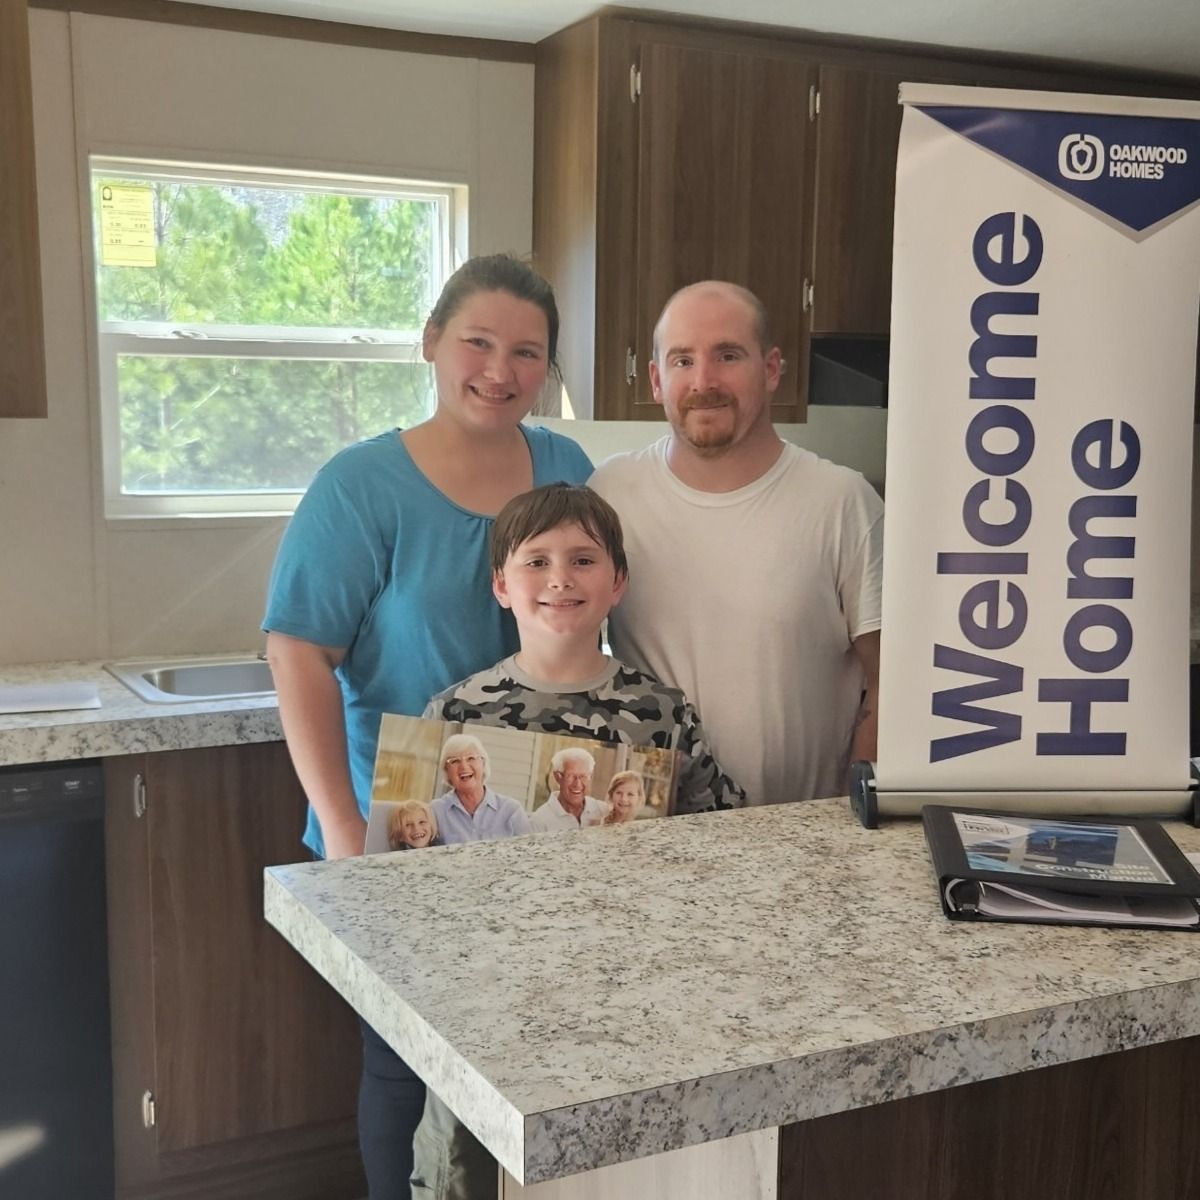 JAMES A. welcome home image